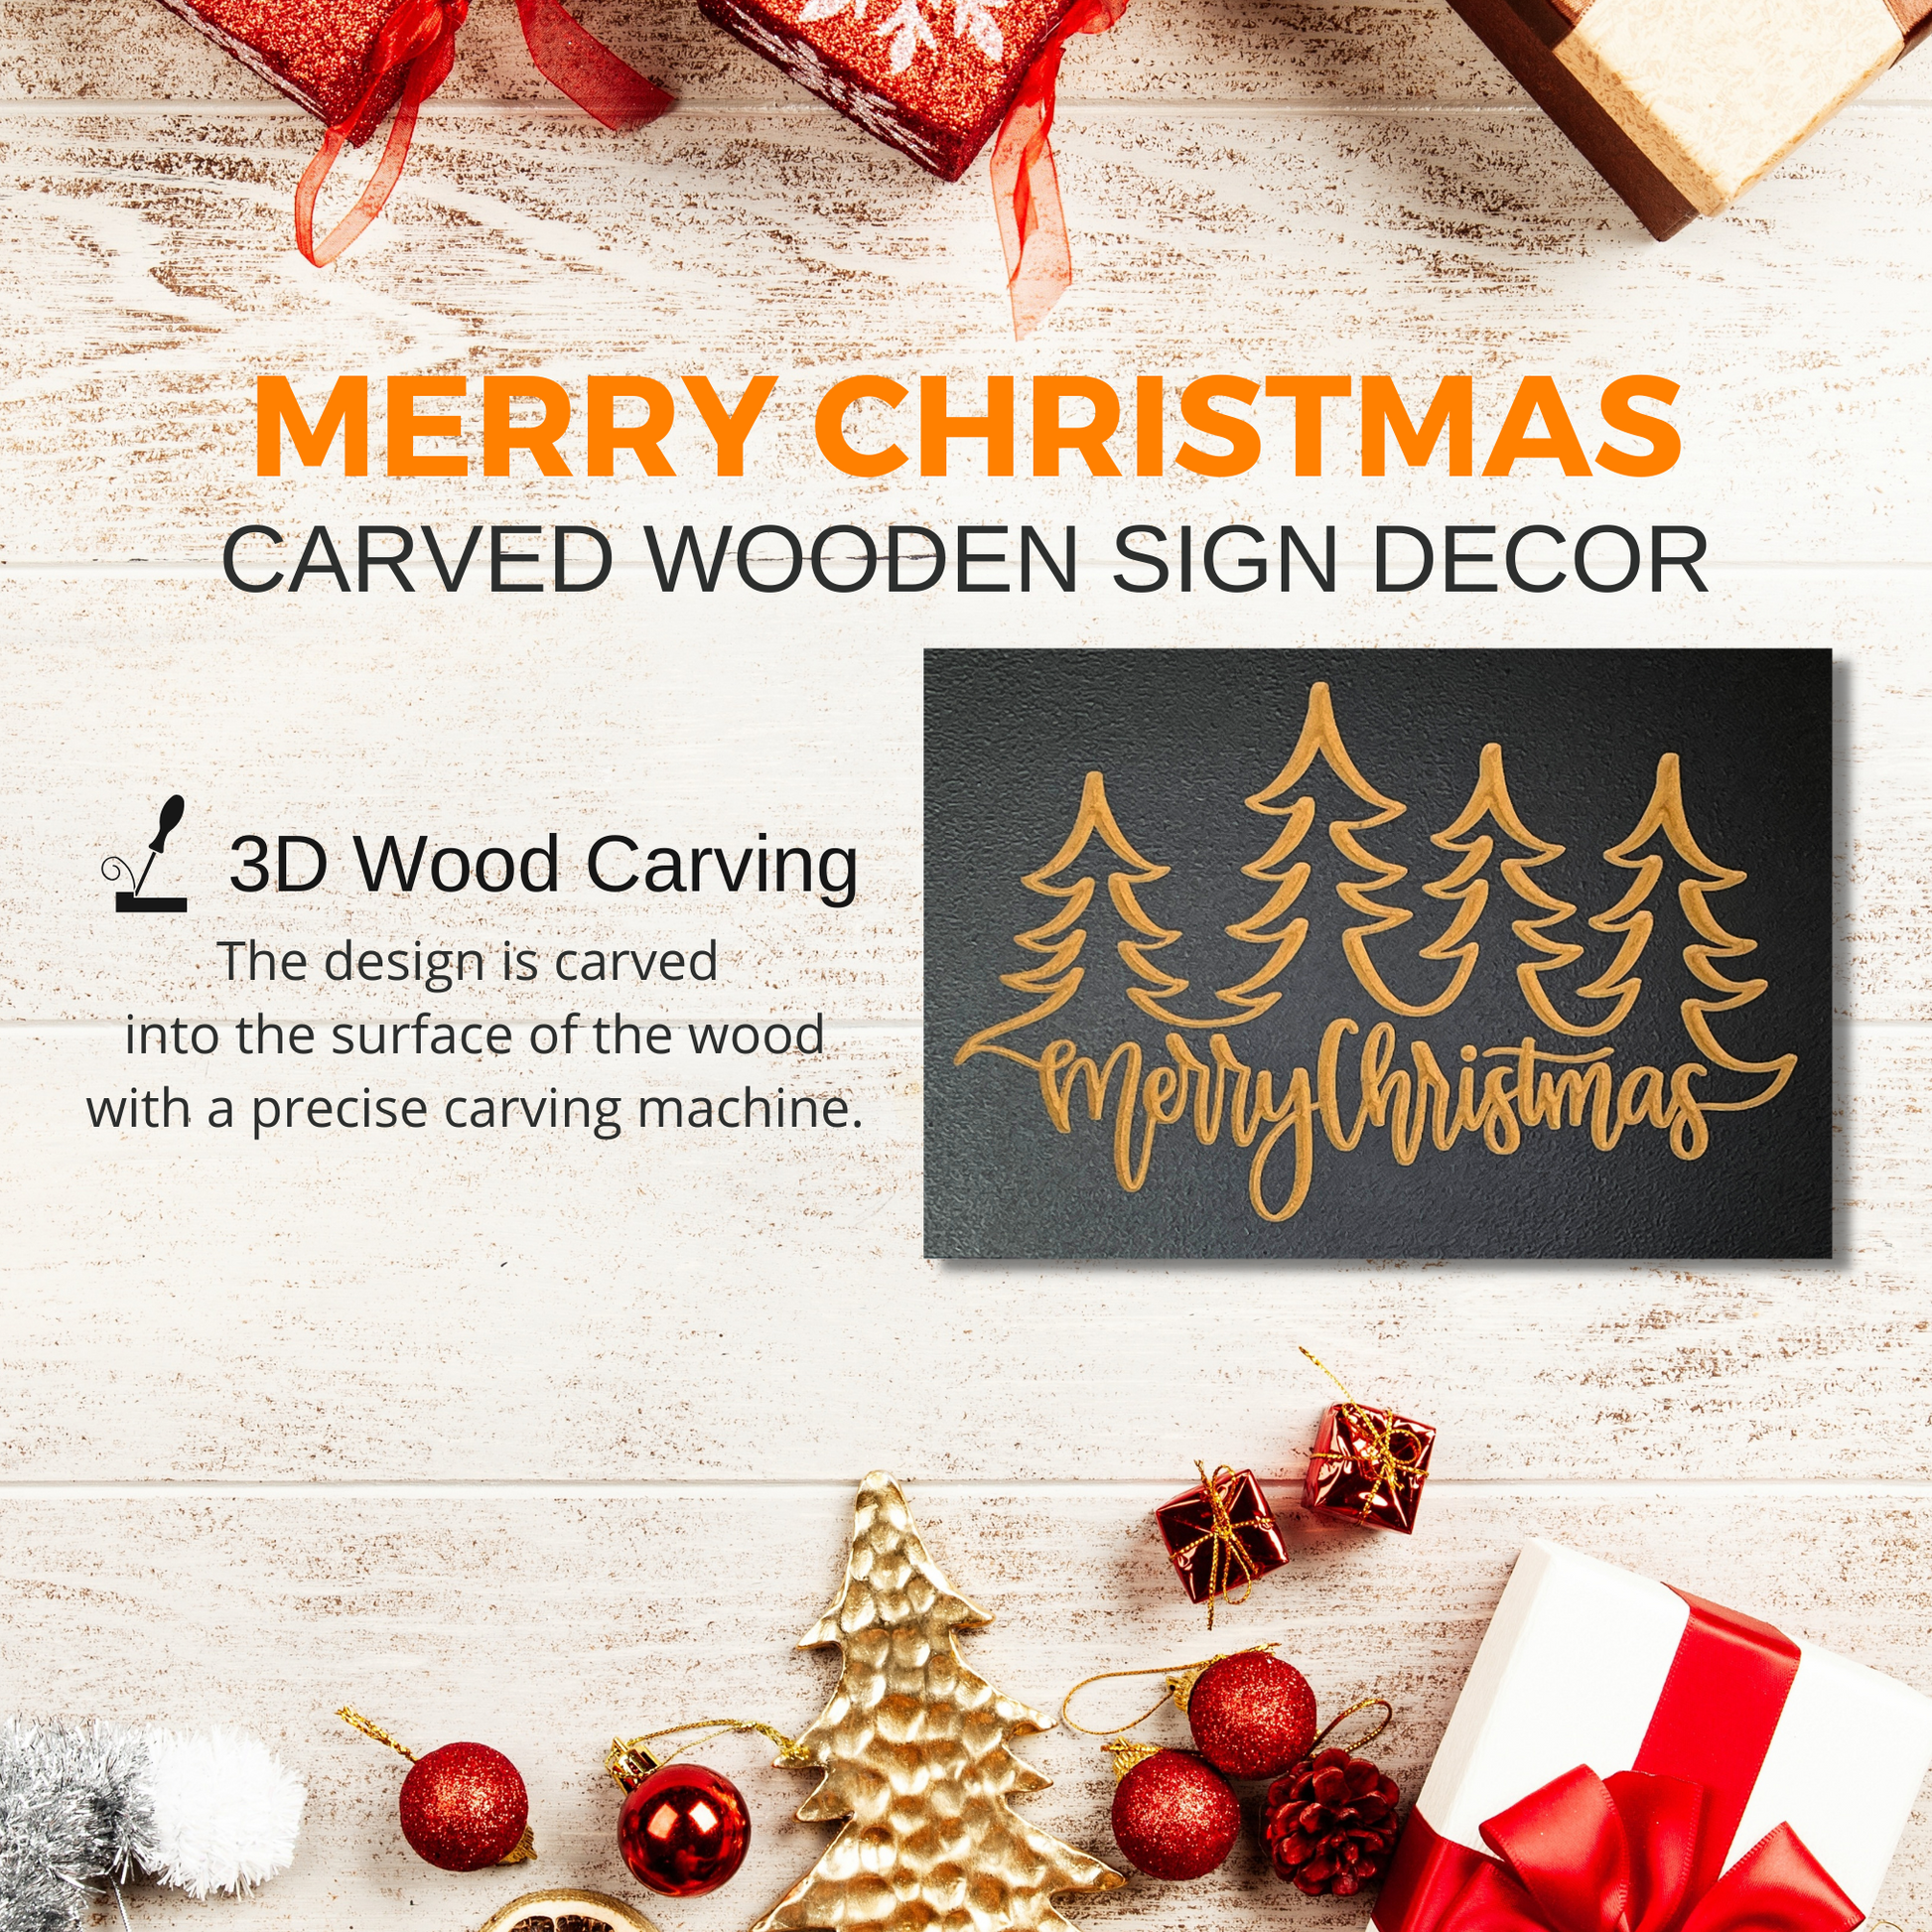 Merry Christmas Nature Carved Wooden Christmas 3D Decor